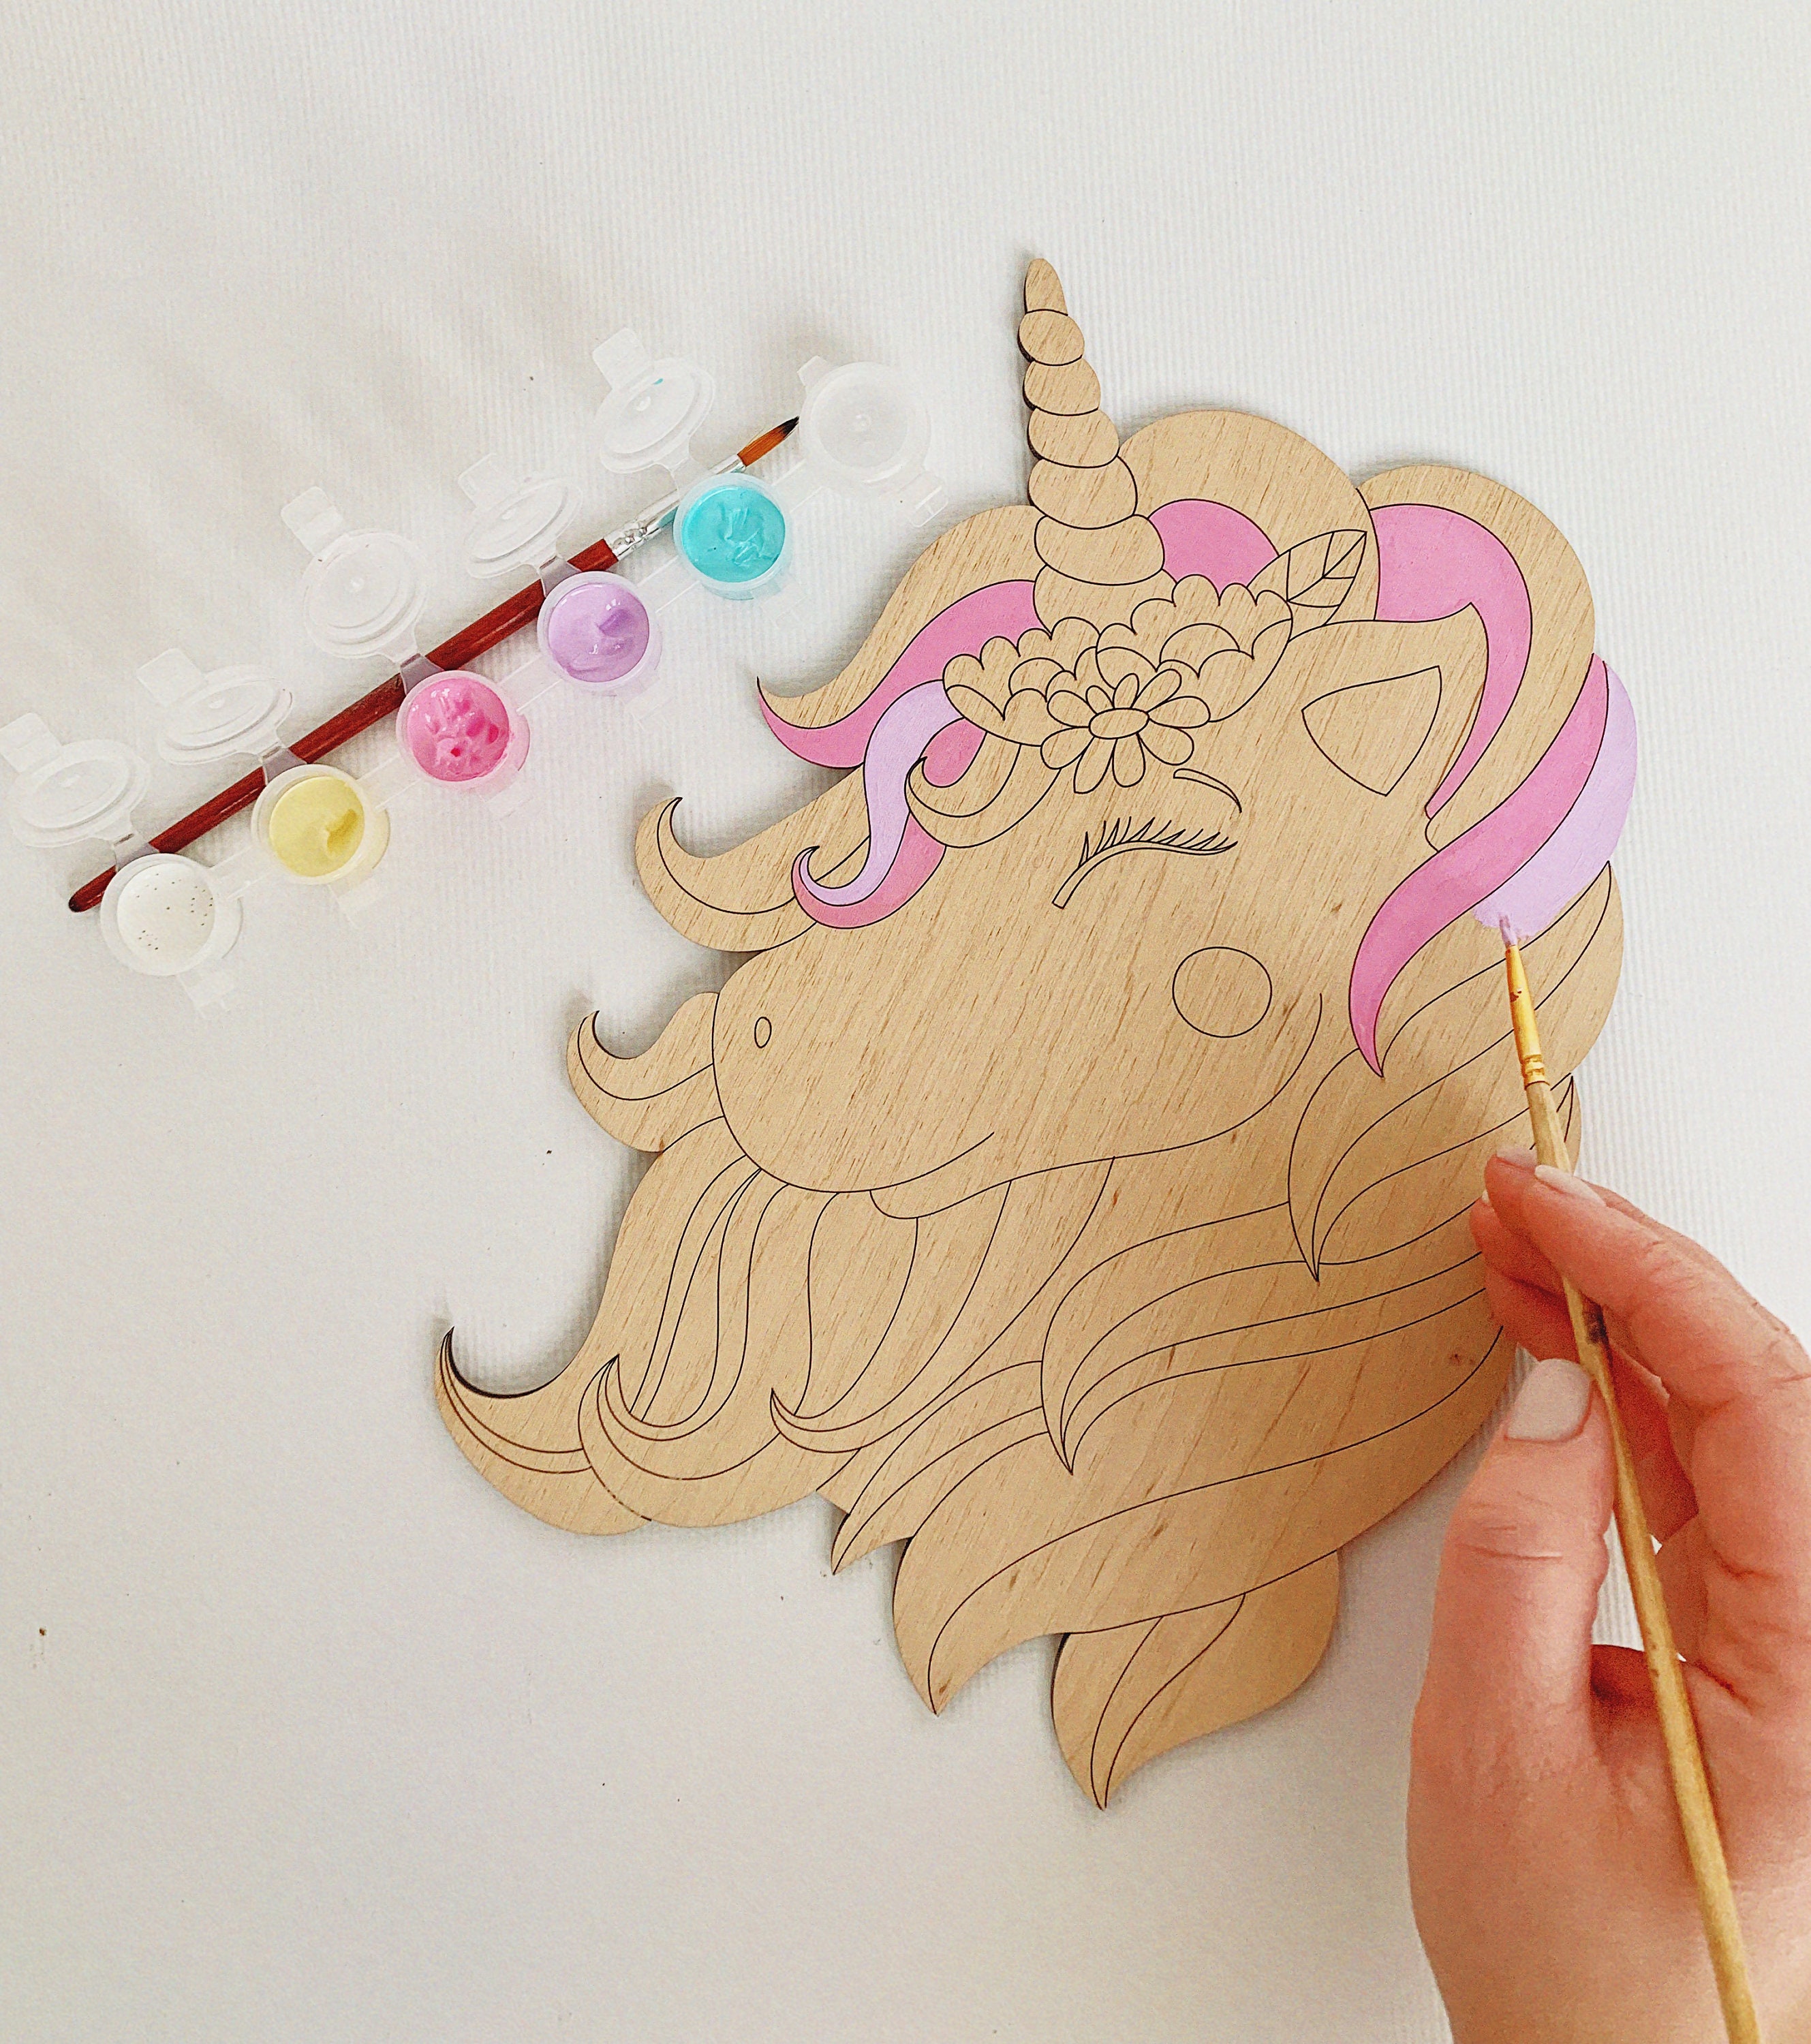 Diy Unicorn Painting Kit For Girls, Fun And Educational Arts And Crafts Set